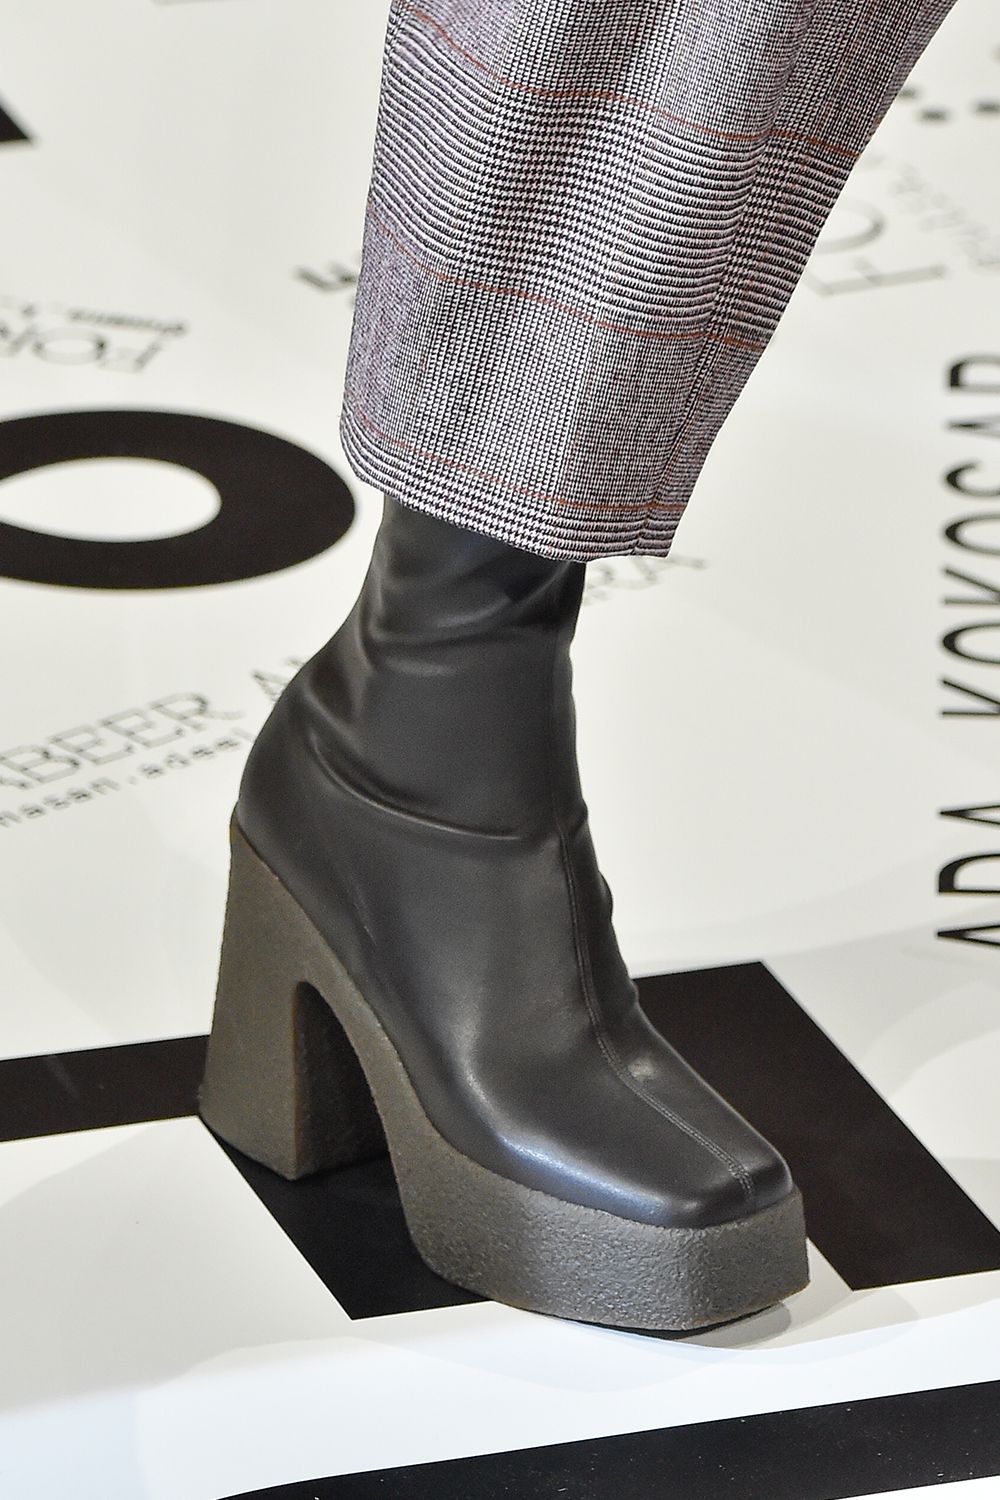 These Will Be the Most Popular Designer Boots of Fall 2019 | Who What Wear